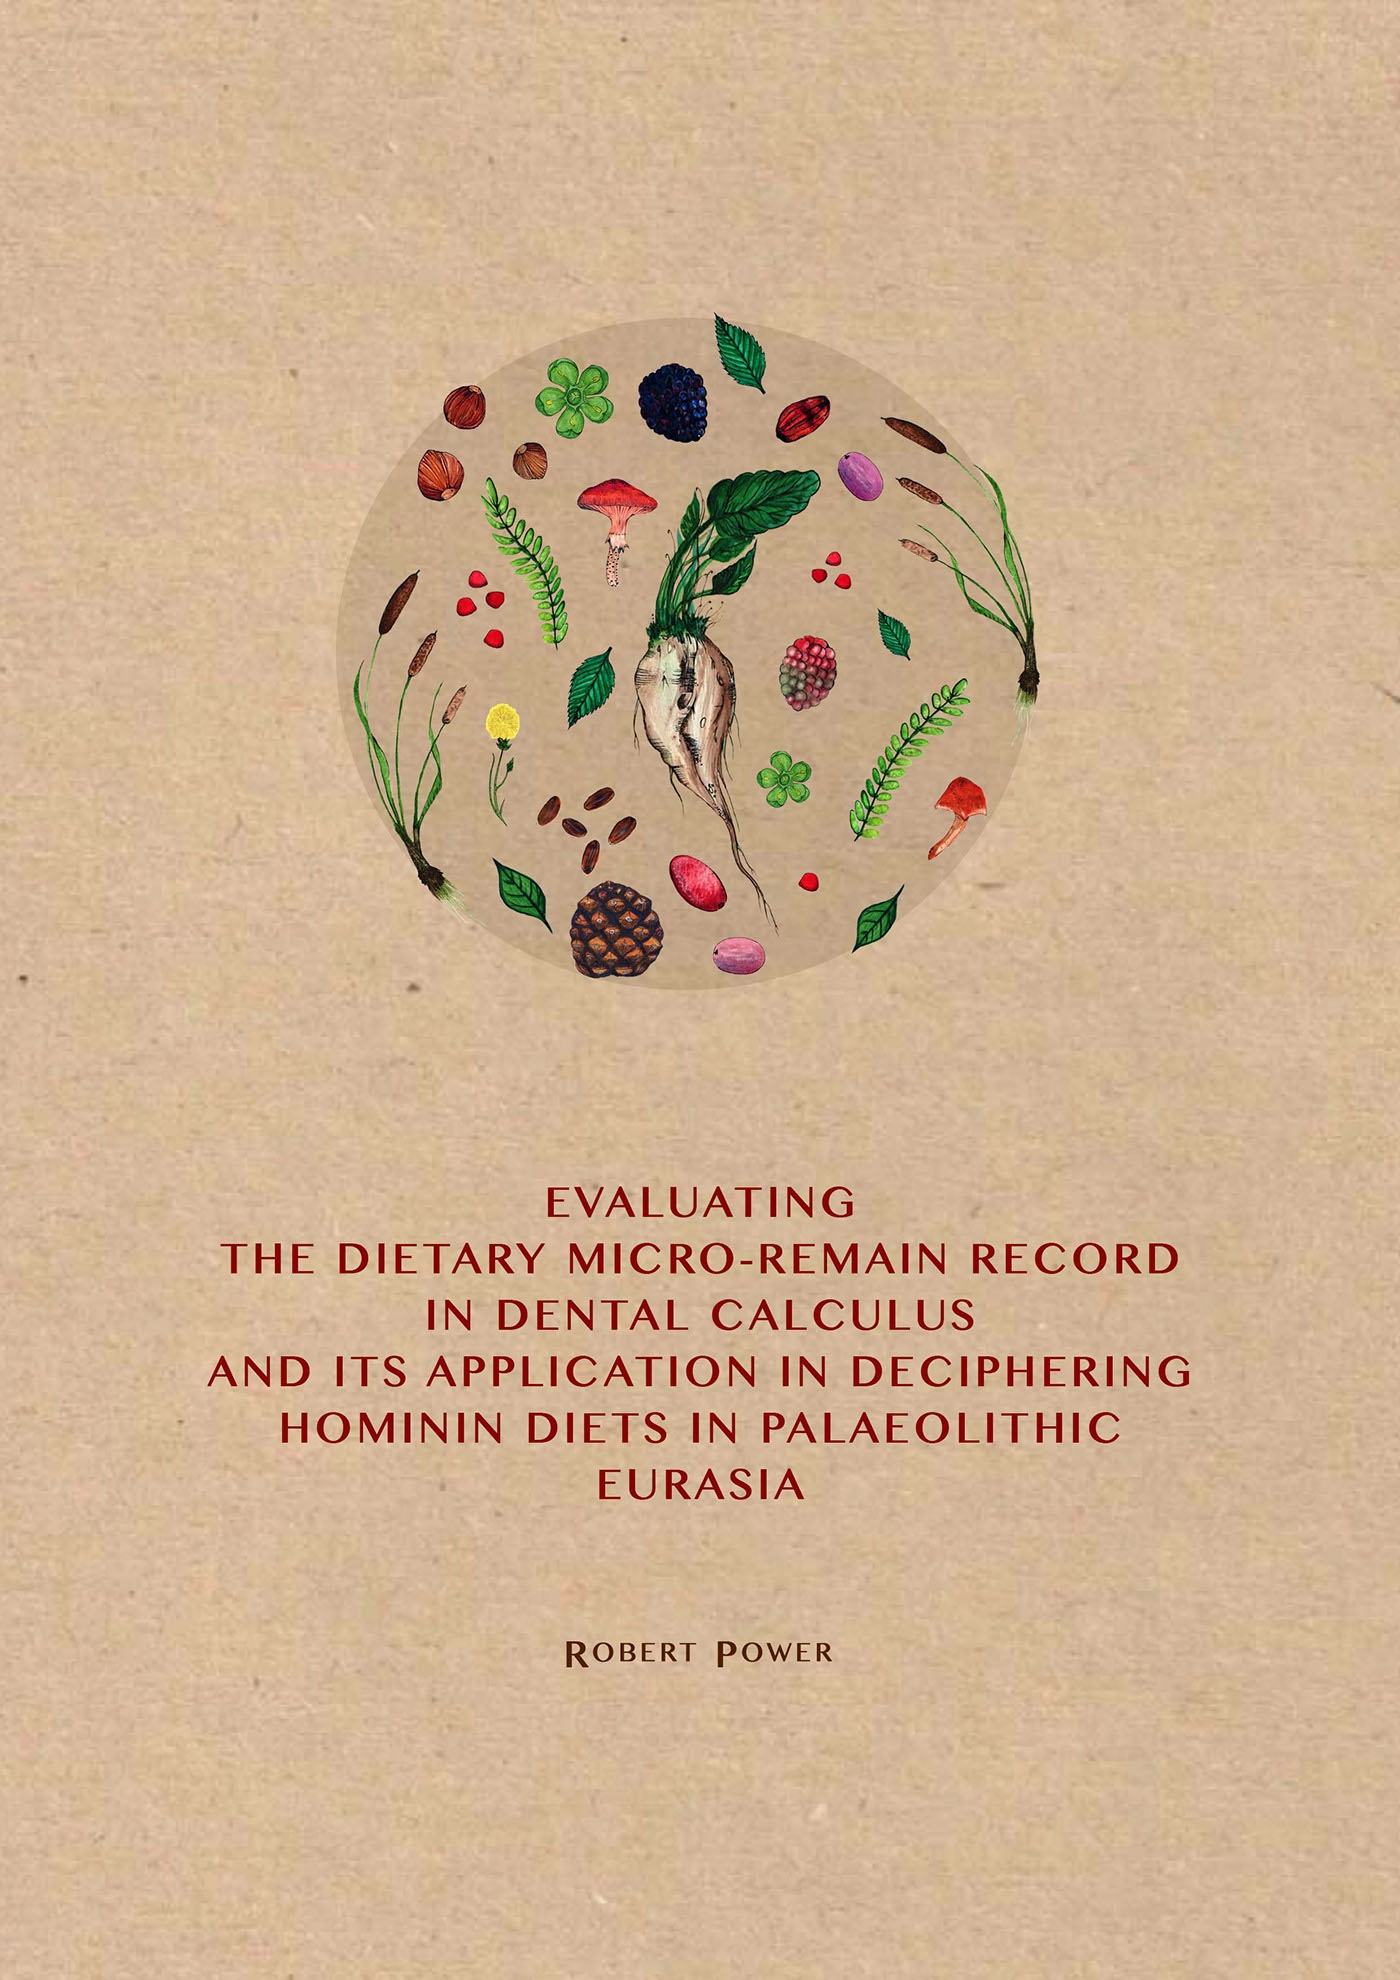 Anthropology archaeology Coverdeign book thesis phd Project